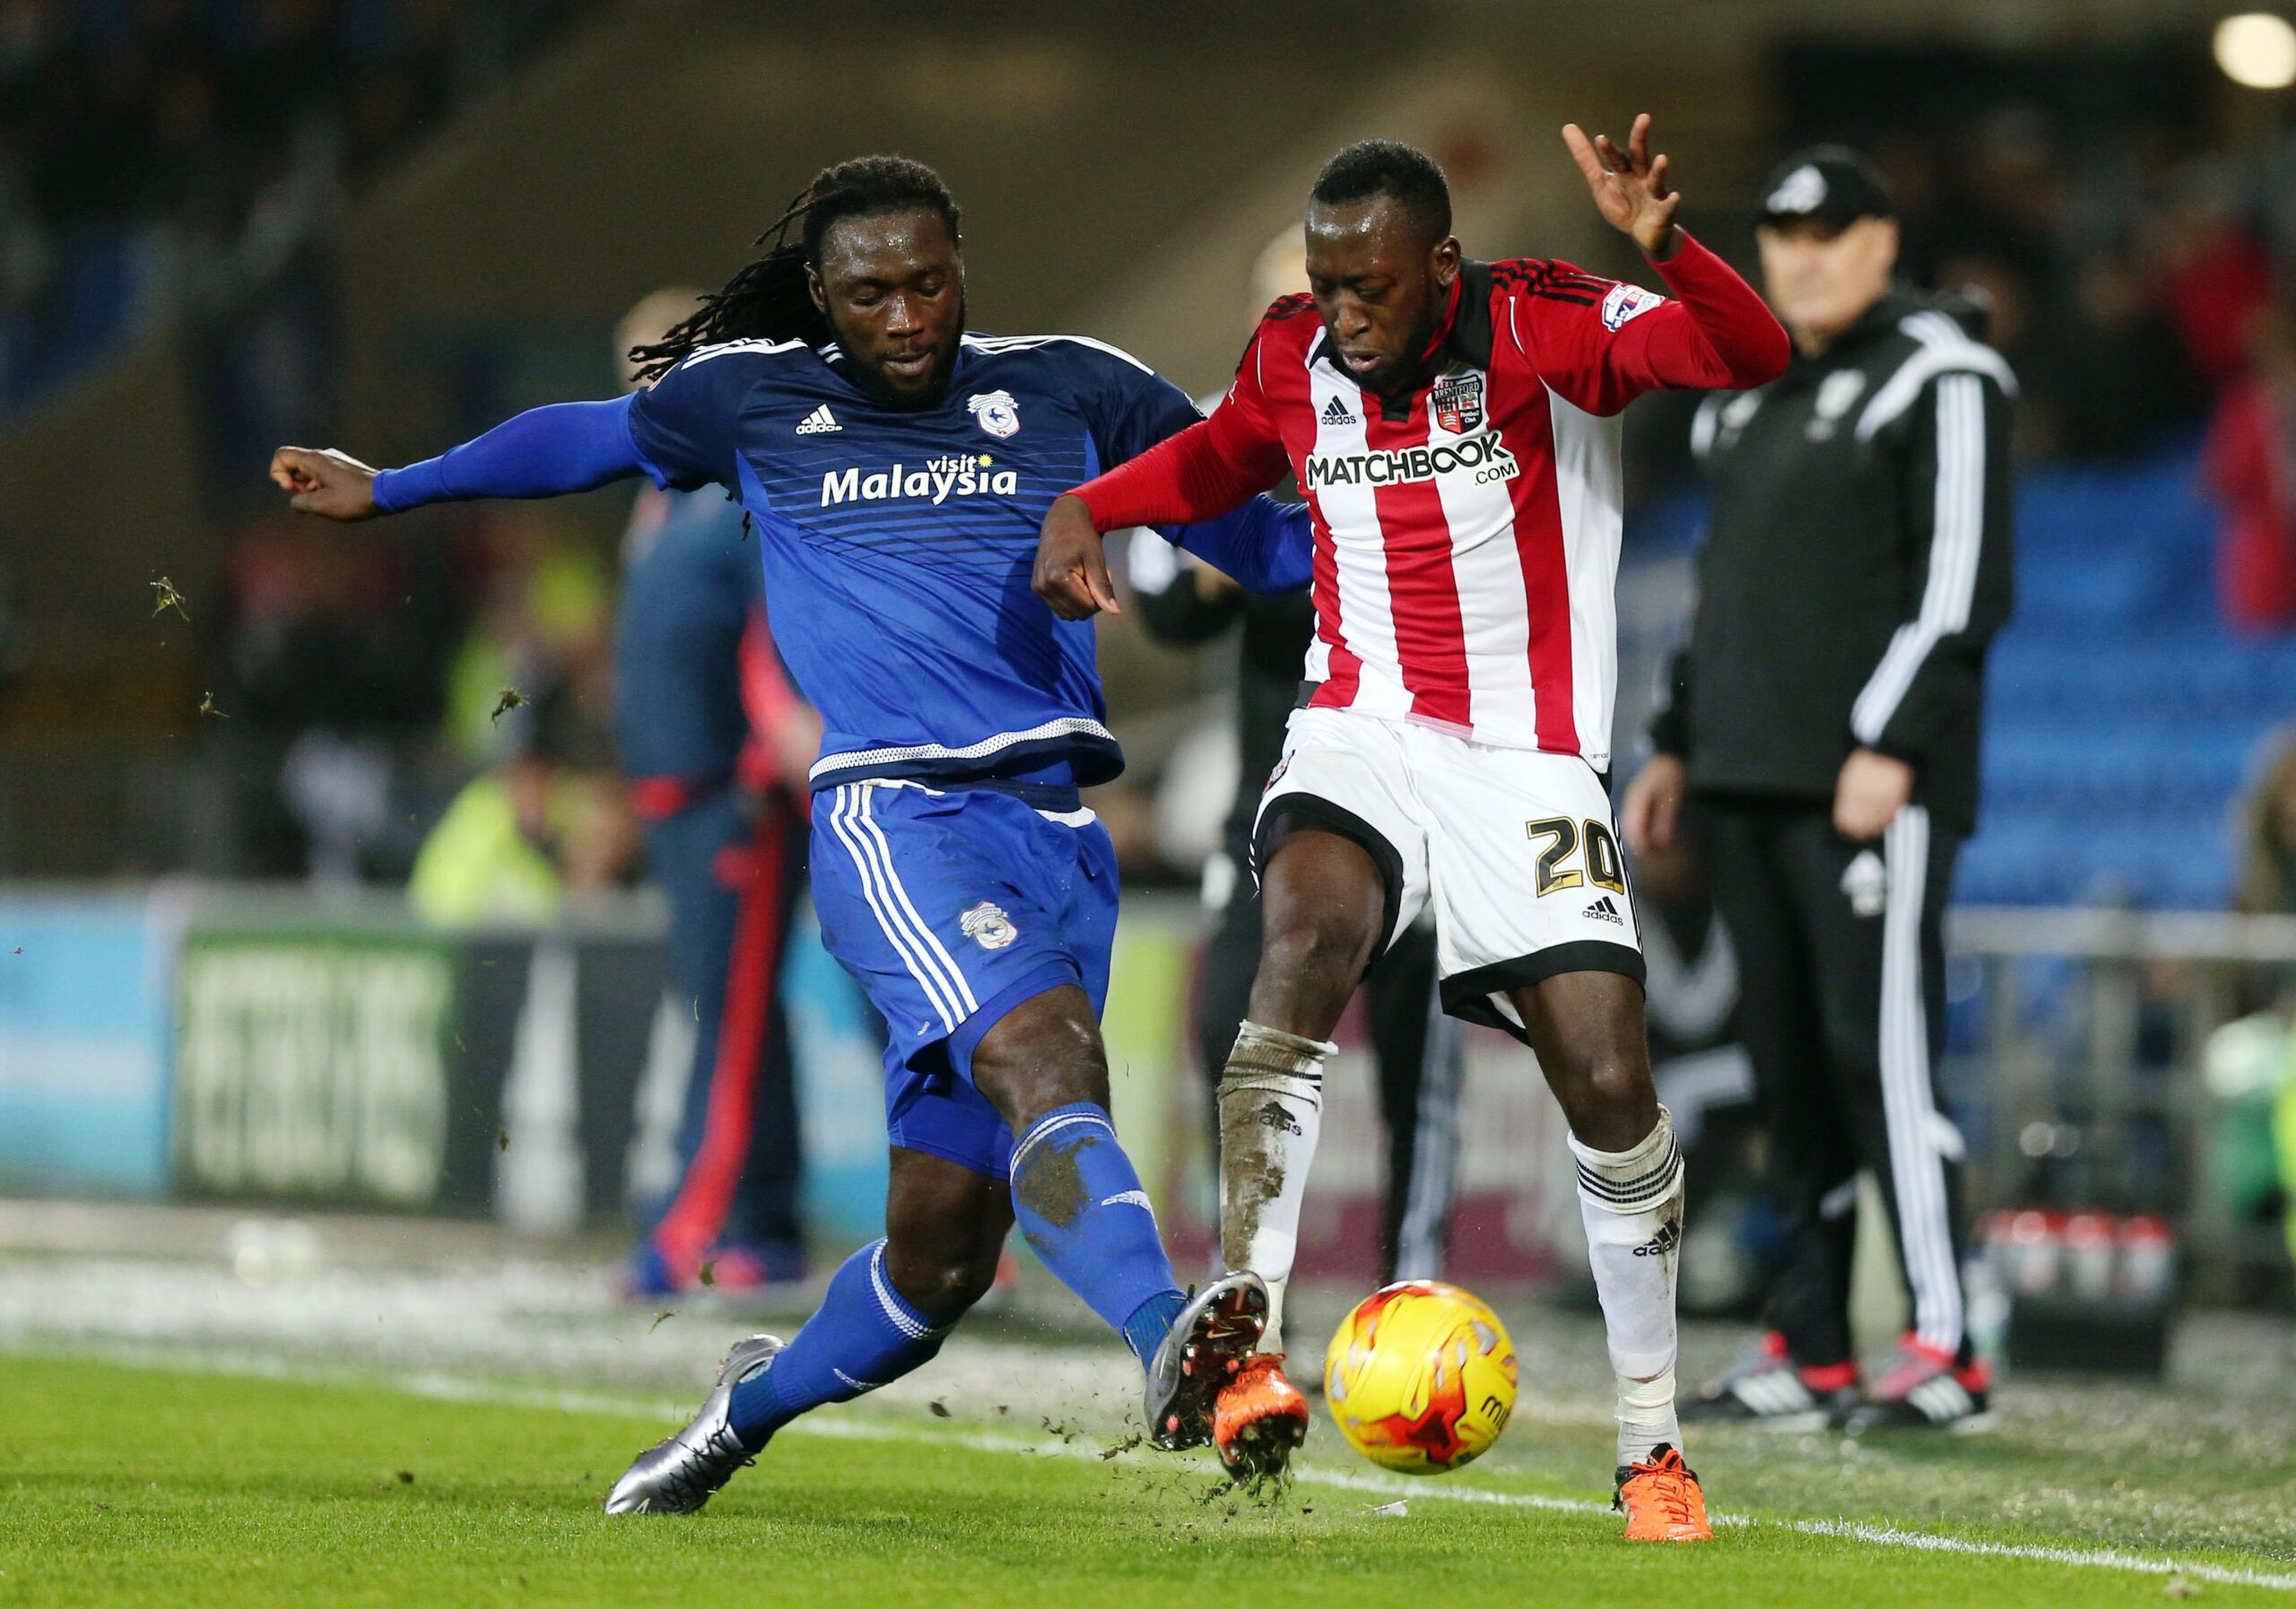 Football Soccer - Cardiff City v Brentford - Sky Bet Football League Championship - Cardiff City Stadium - 15/12/15 
Cardiff's Kenwyne Jones and Brentford's Toumani Diagouraga 
Mandatory Credit: Action Images / Alex Morton 
Livepic 
EDITORIAL USE ONLY. No use with unauthorized audio, video, data, fixture lists, club/league logos or 